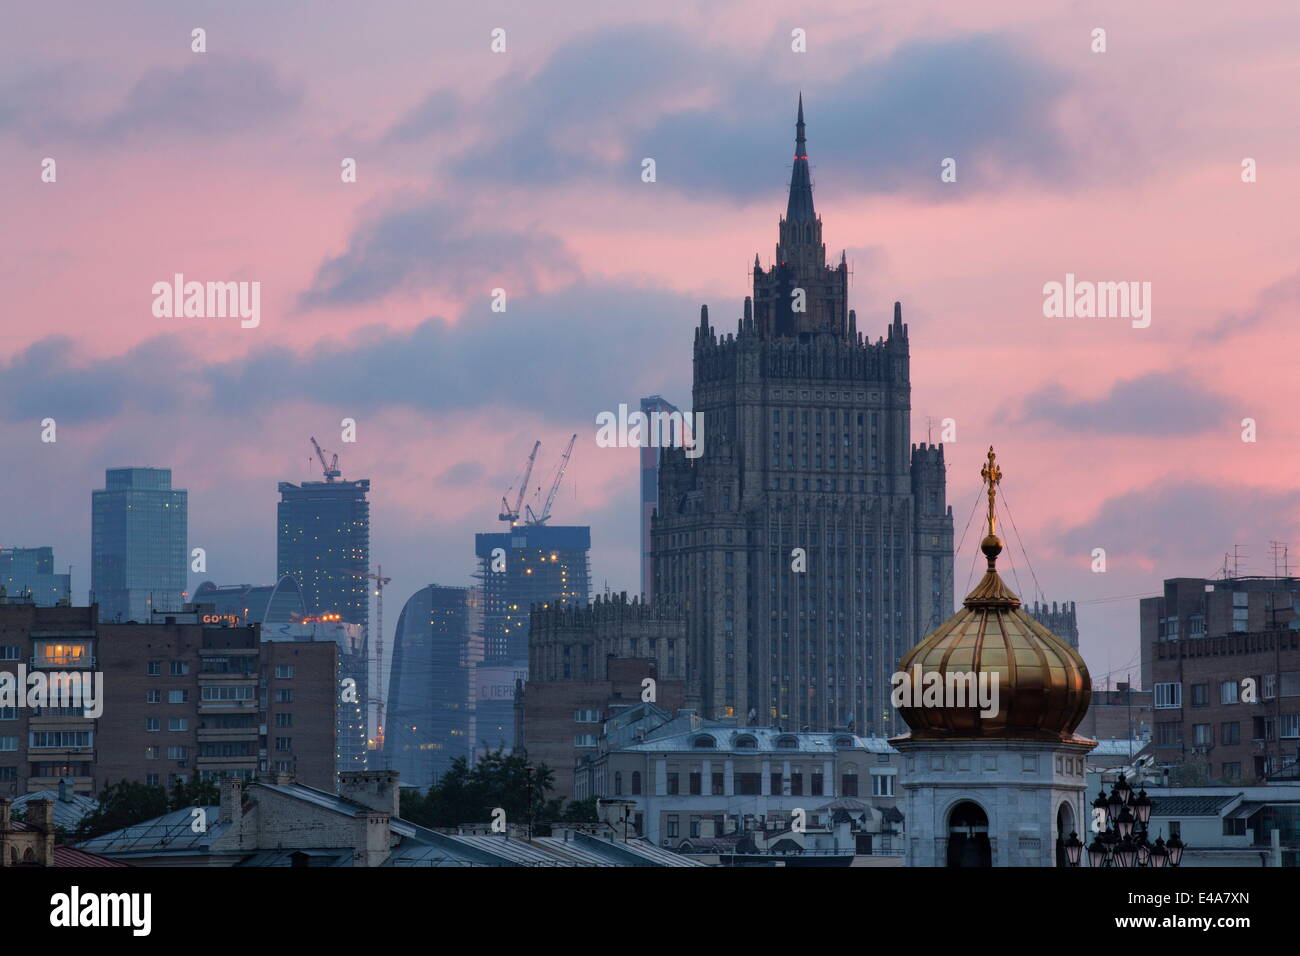 Moscow skyline at Dusk avec Stalanist-Gothic gratte-ciel, Moscou, Russie, Europe Banque D'Images